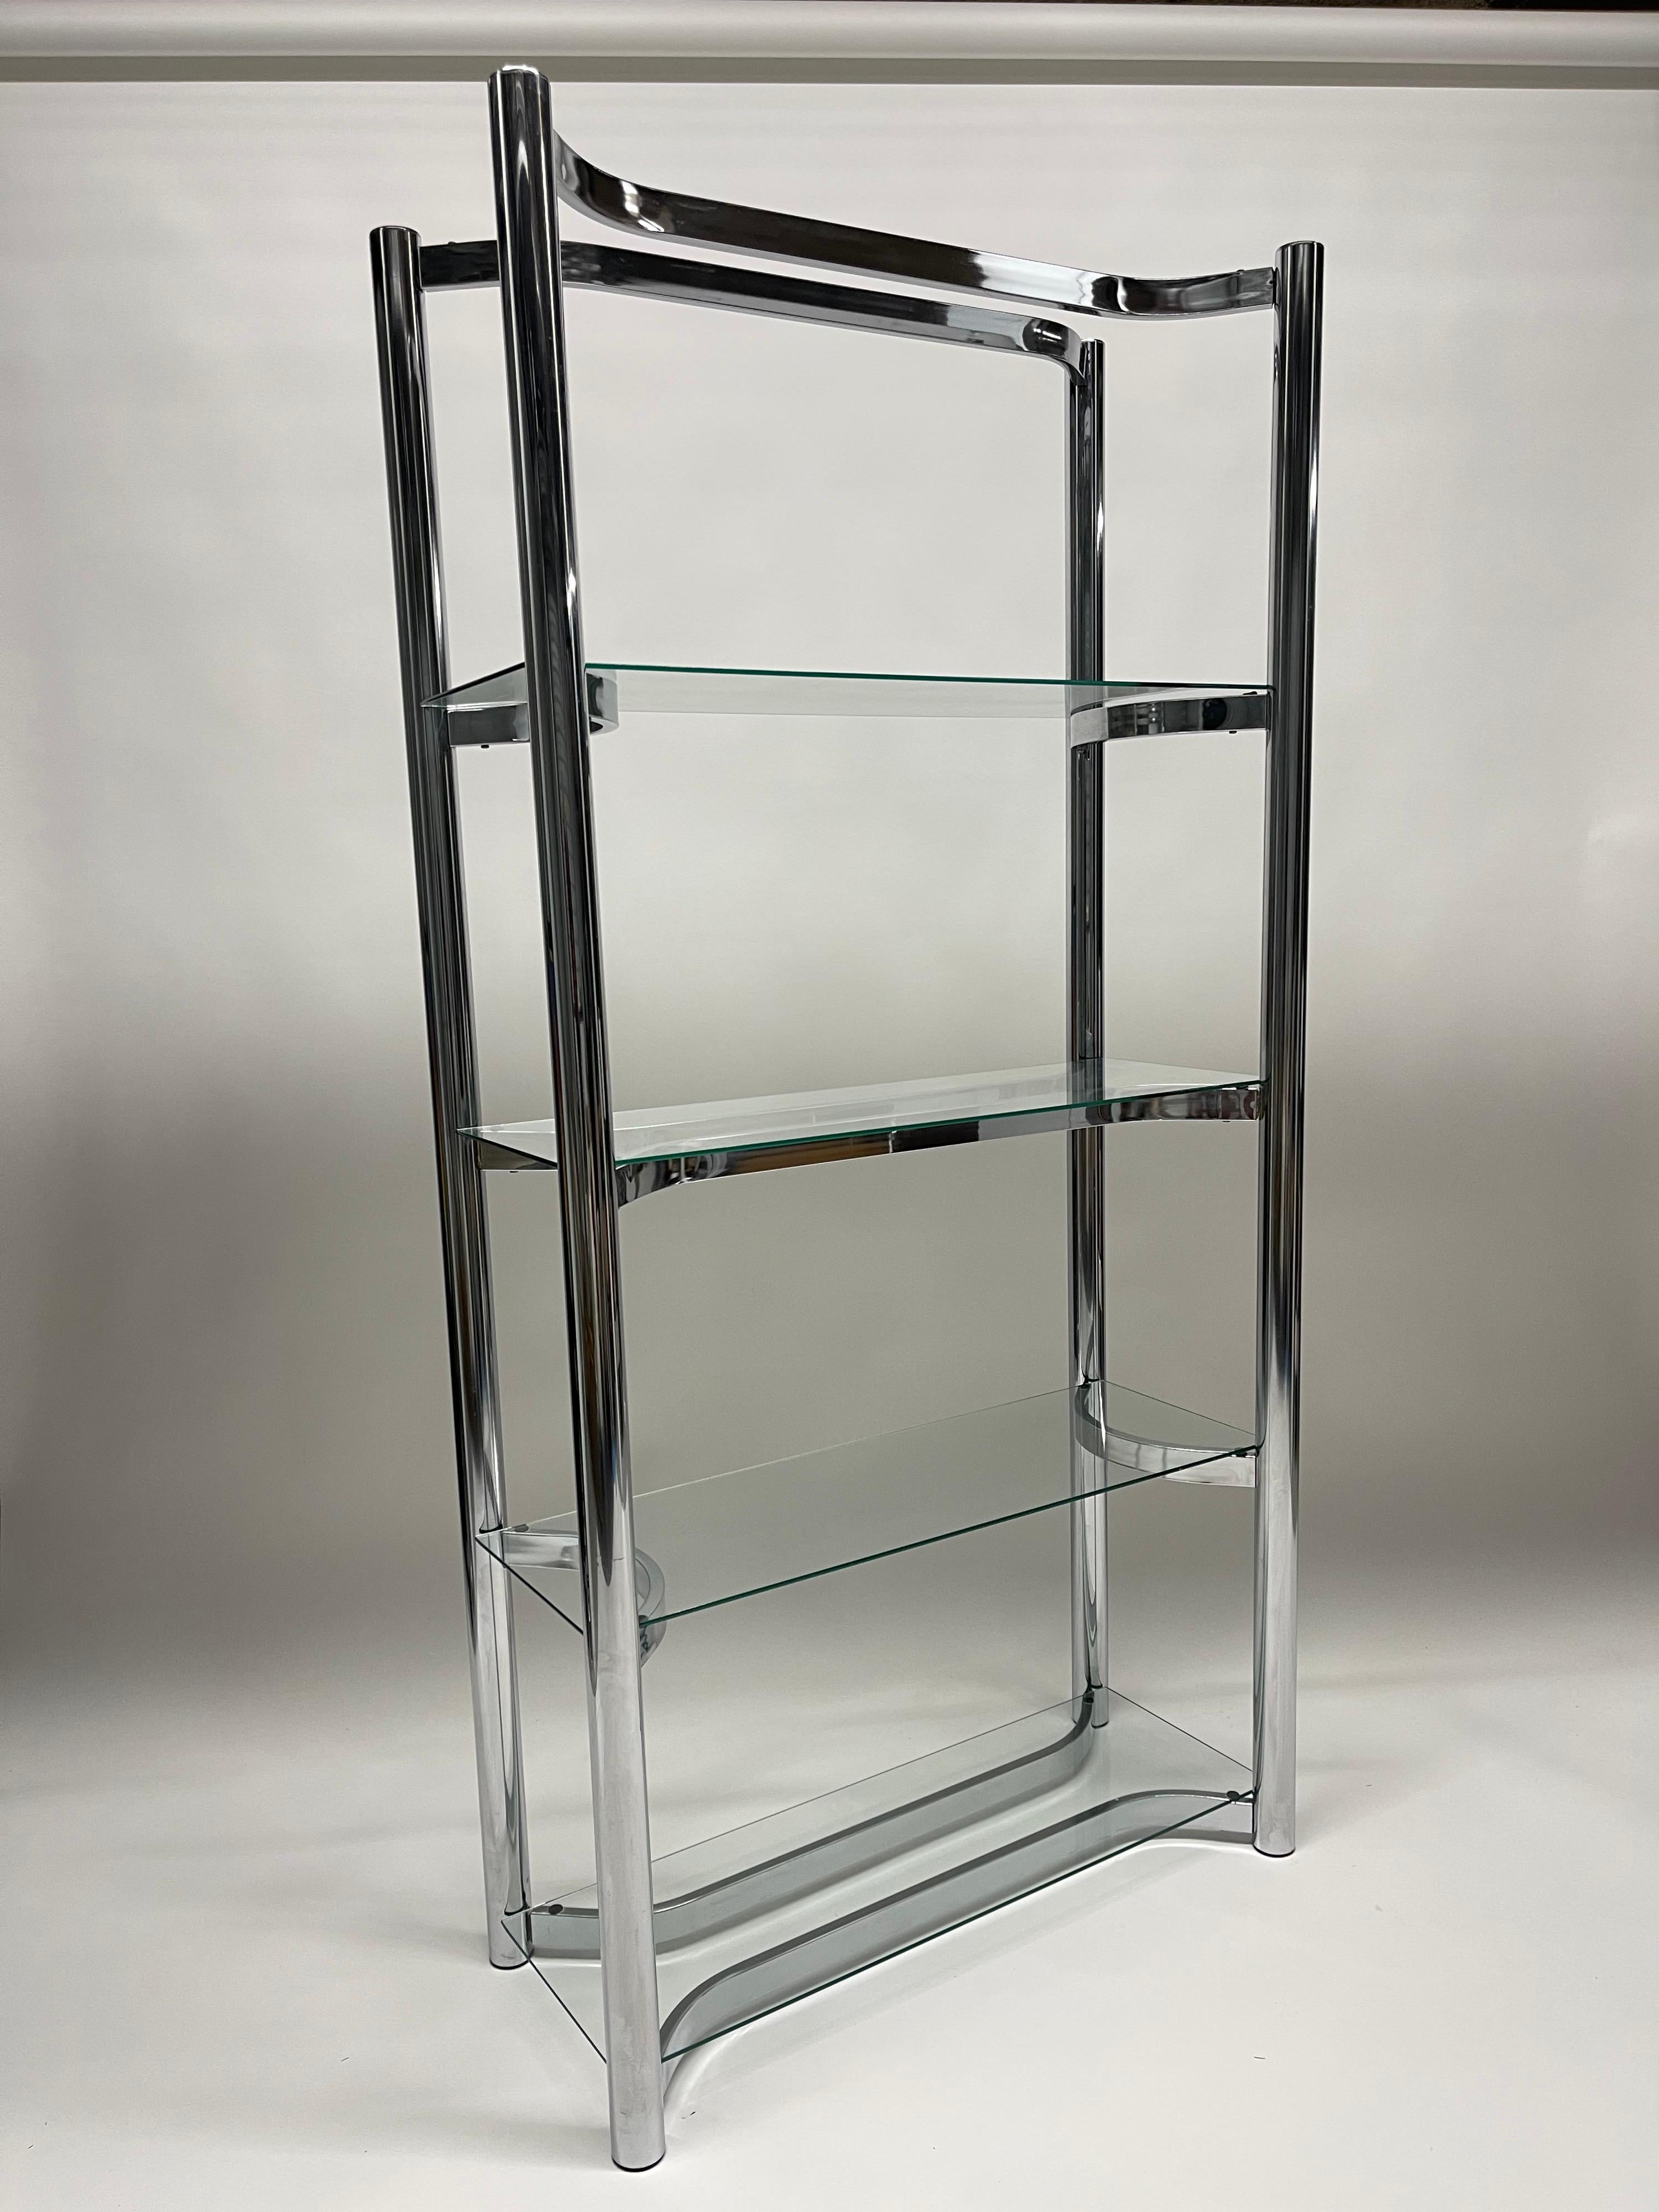 Mid-century etagere bookcase shelf rendered in chrome plated steel frame with glass shelves, Finished on all sides, can float in middle of room. c 1970s.